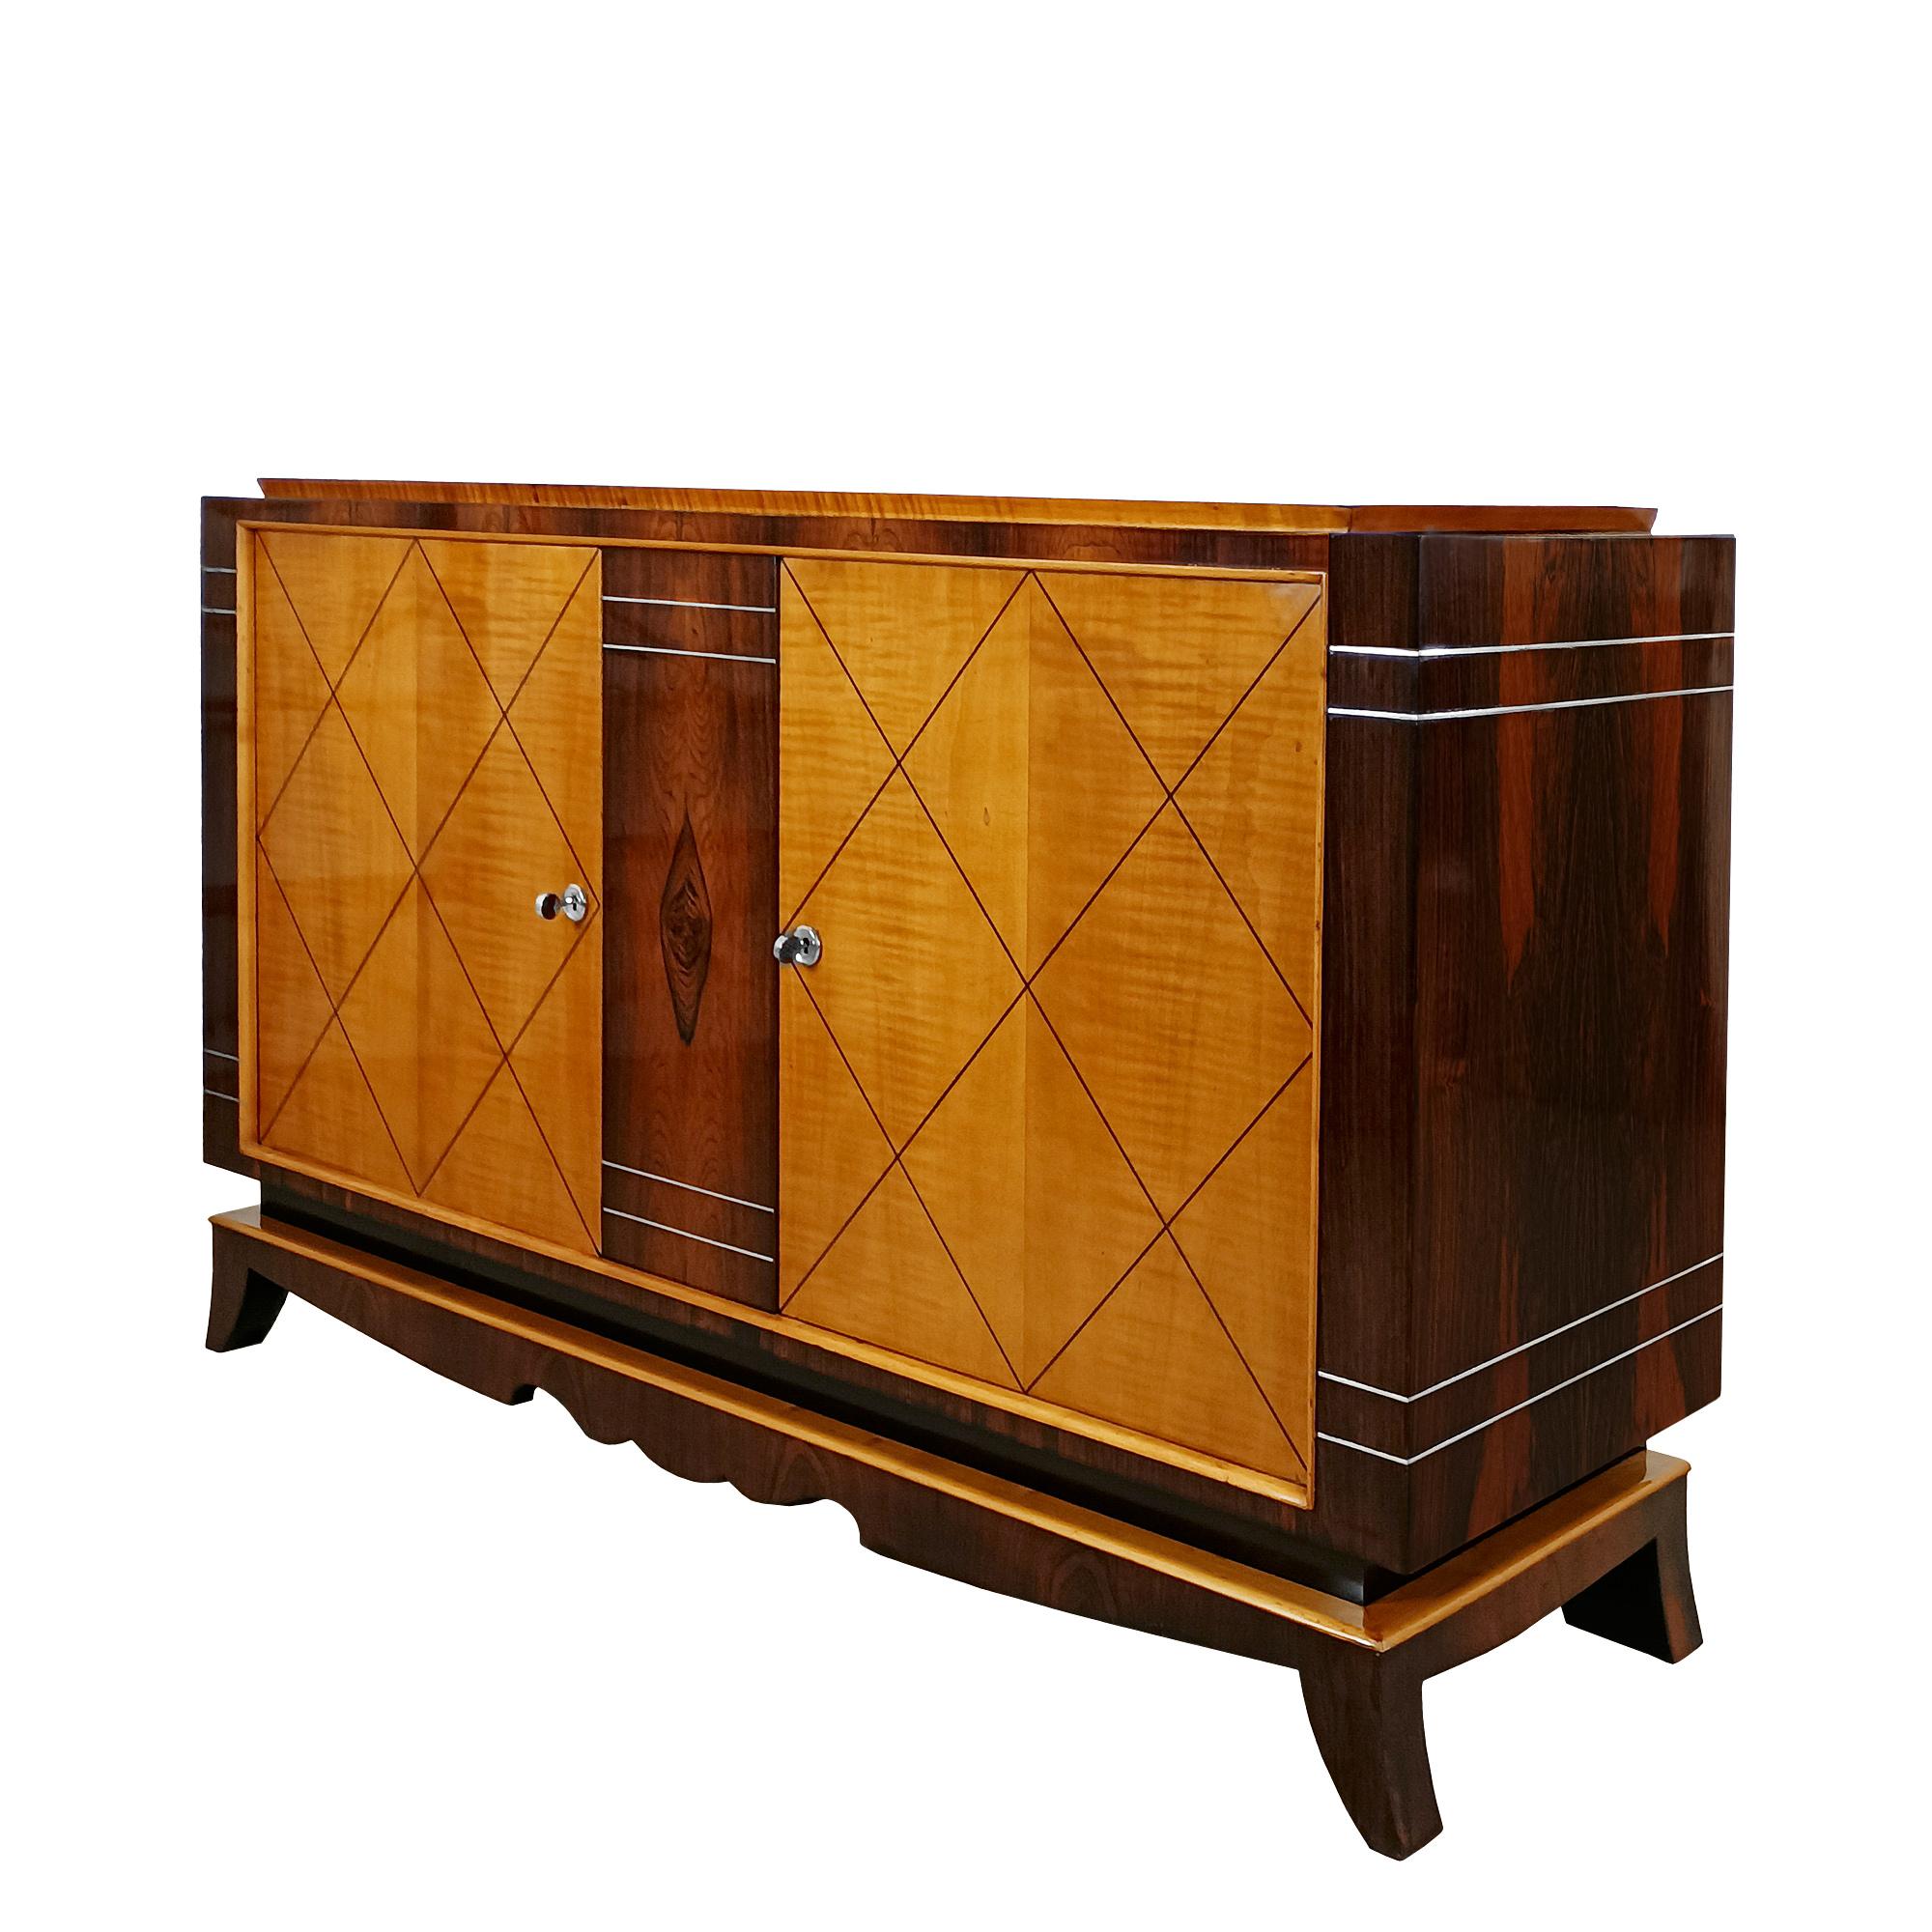 Two-doors sideboard in solid mahogany with Rio rosewood veneer throughout, and maple veneer with dark wood marquetry on the doors. Door frames and top of base in solid maple. Polished aluminium decorative rods. Interior shelves with mahogany veneer